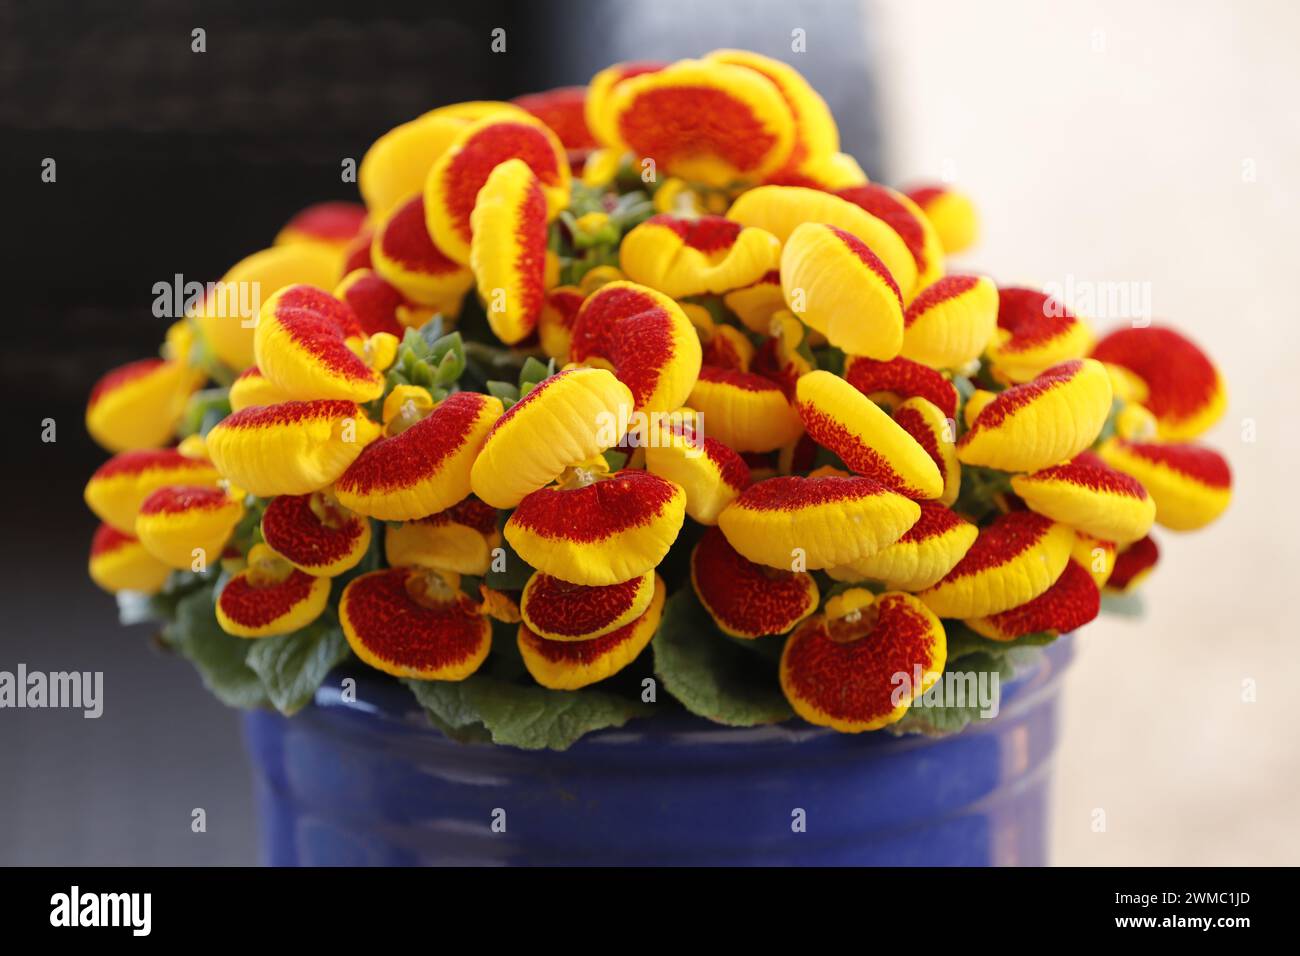 Calceolaria a plant full with yellow red flowers Stock Photo